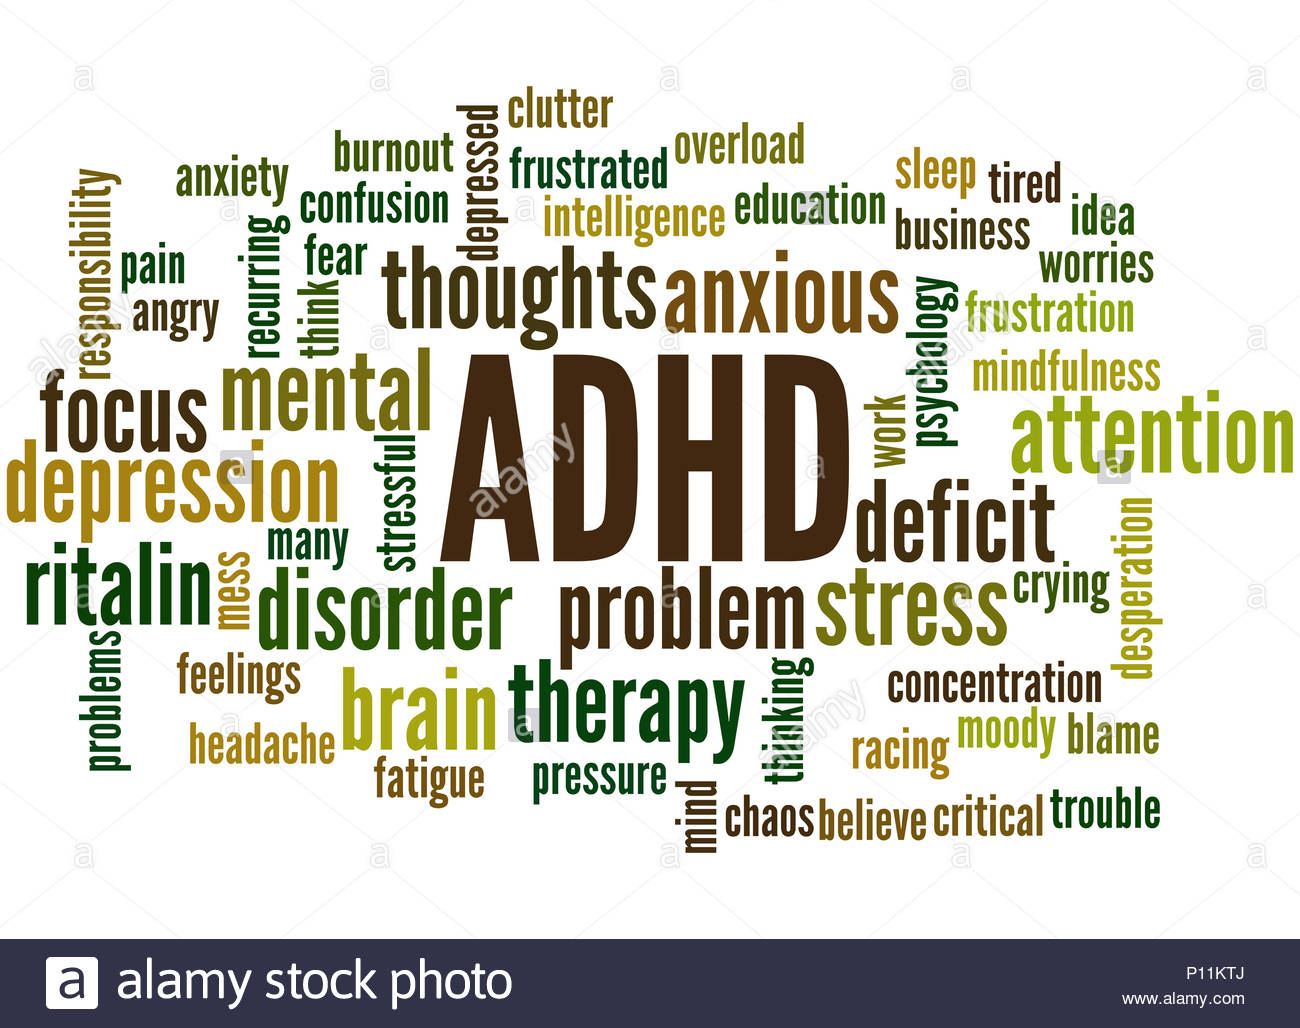 Free download ADHD Attention Deficit Hyperactivity Disorder word cloud ...